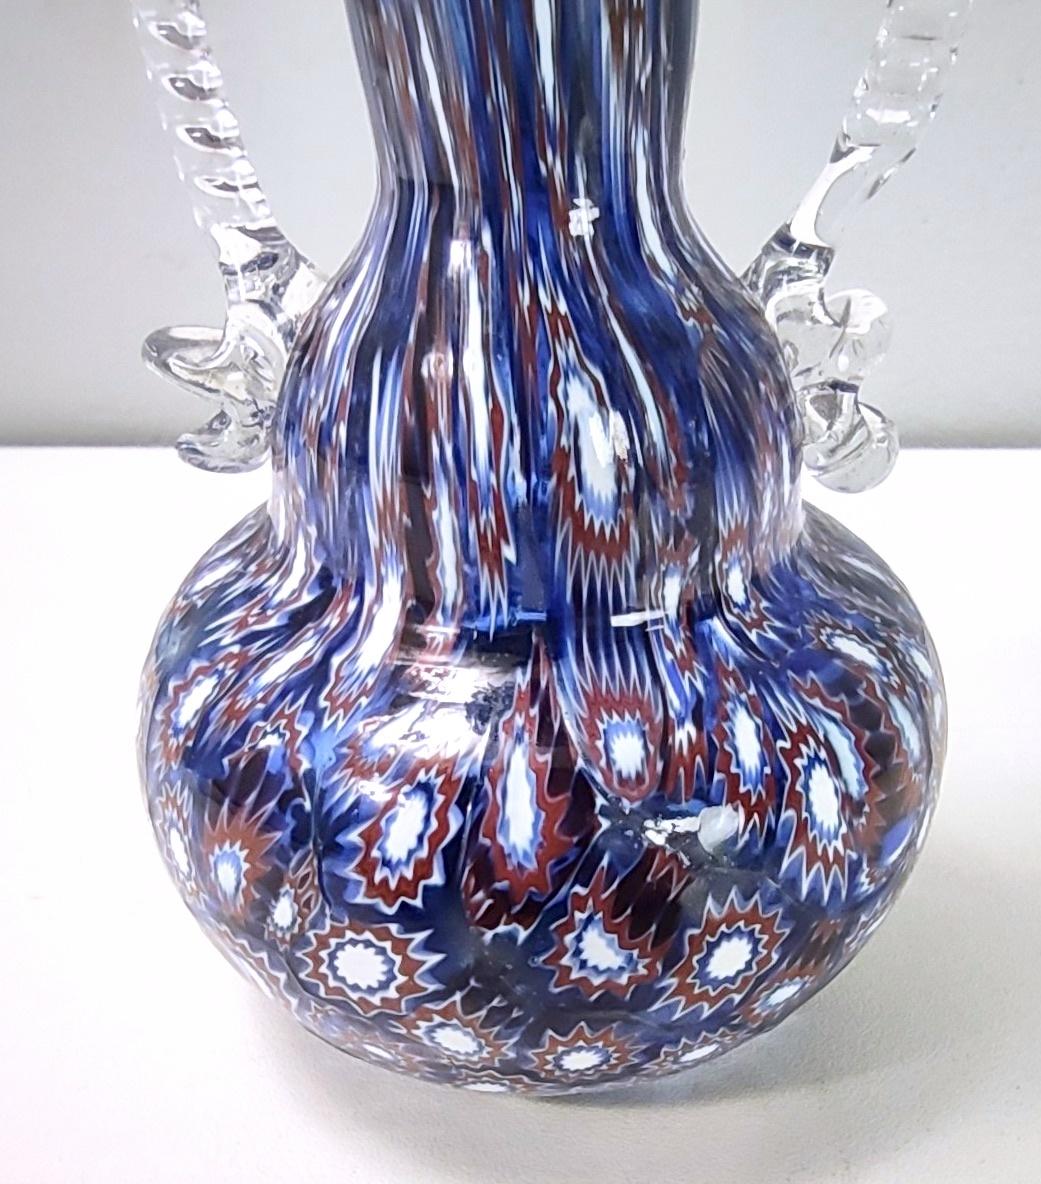 Vintage Blue Murano Glass Vase Ascribable to Fratelli Toso with Murrines, Italy For Sale 6